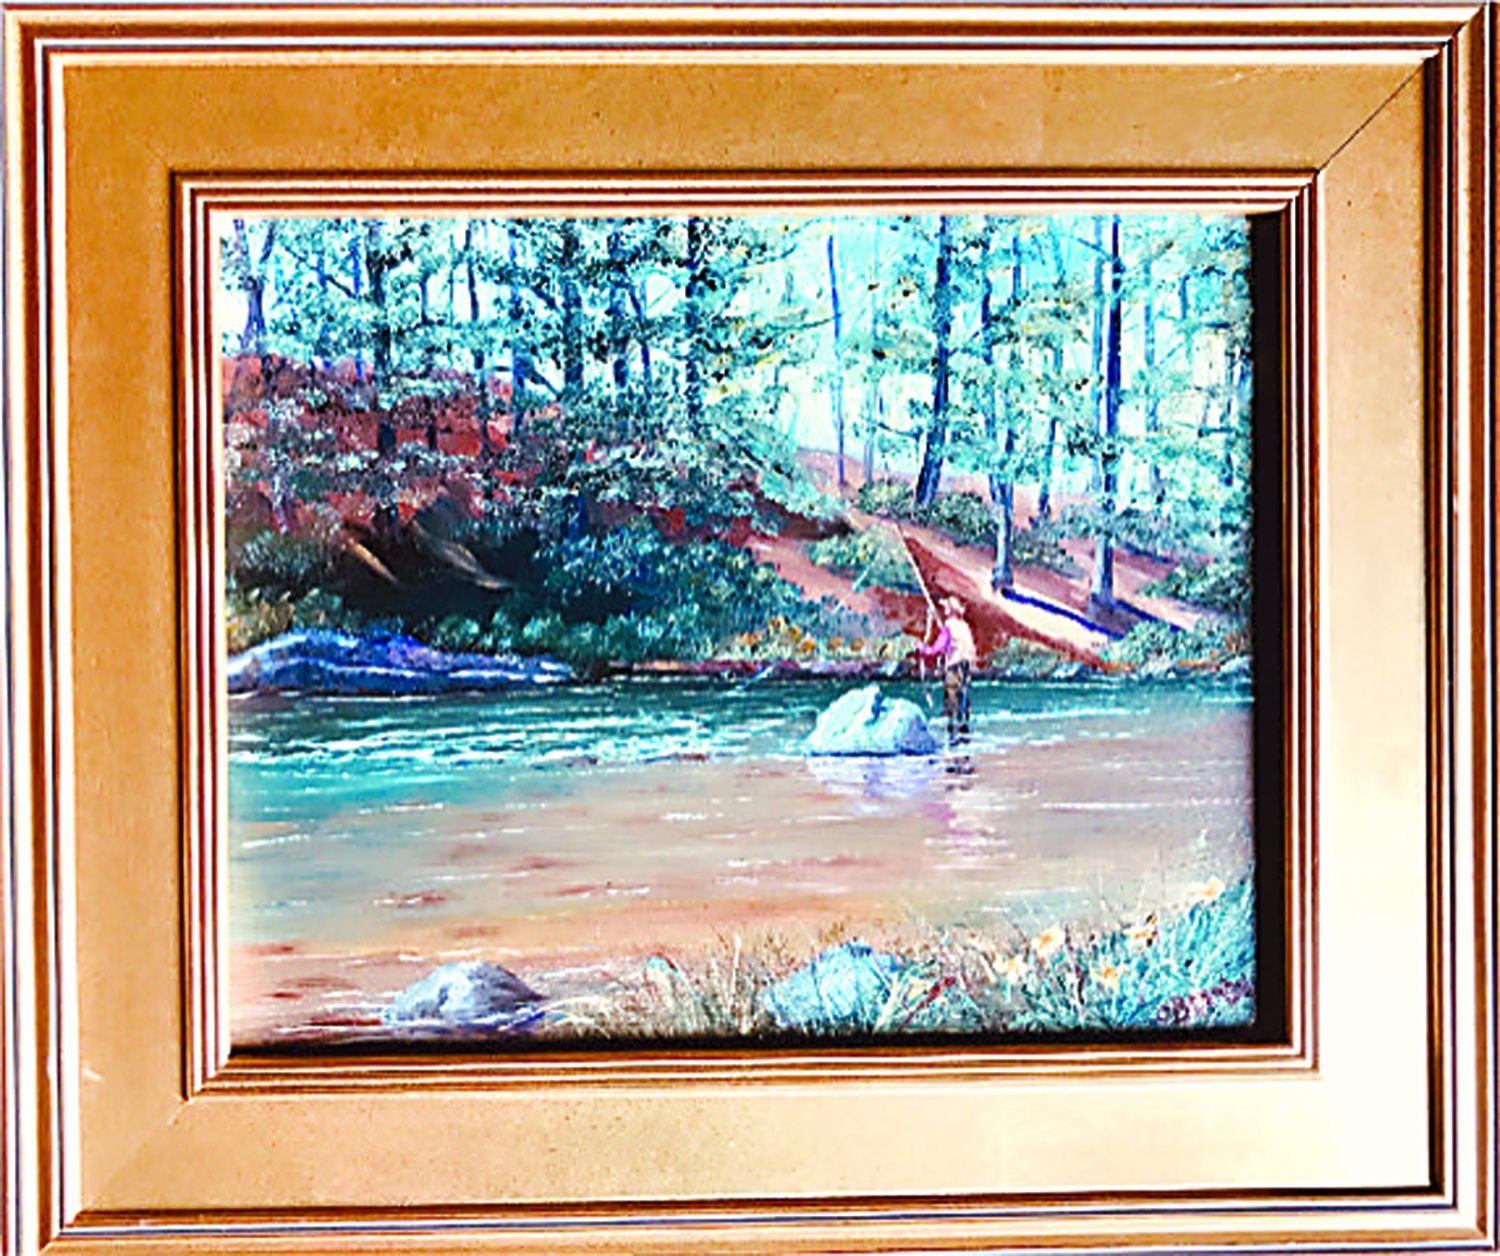 “Fishing the Home Pool” by the late George Bramhall is up for silent auction at the event.